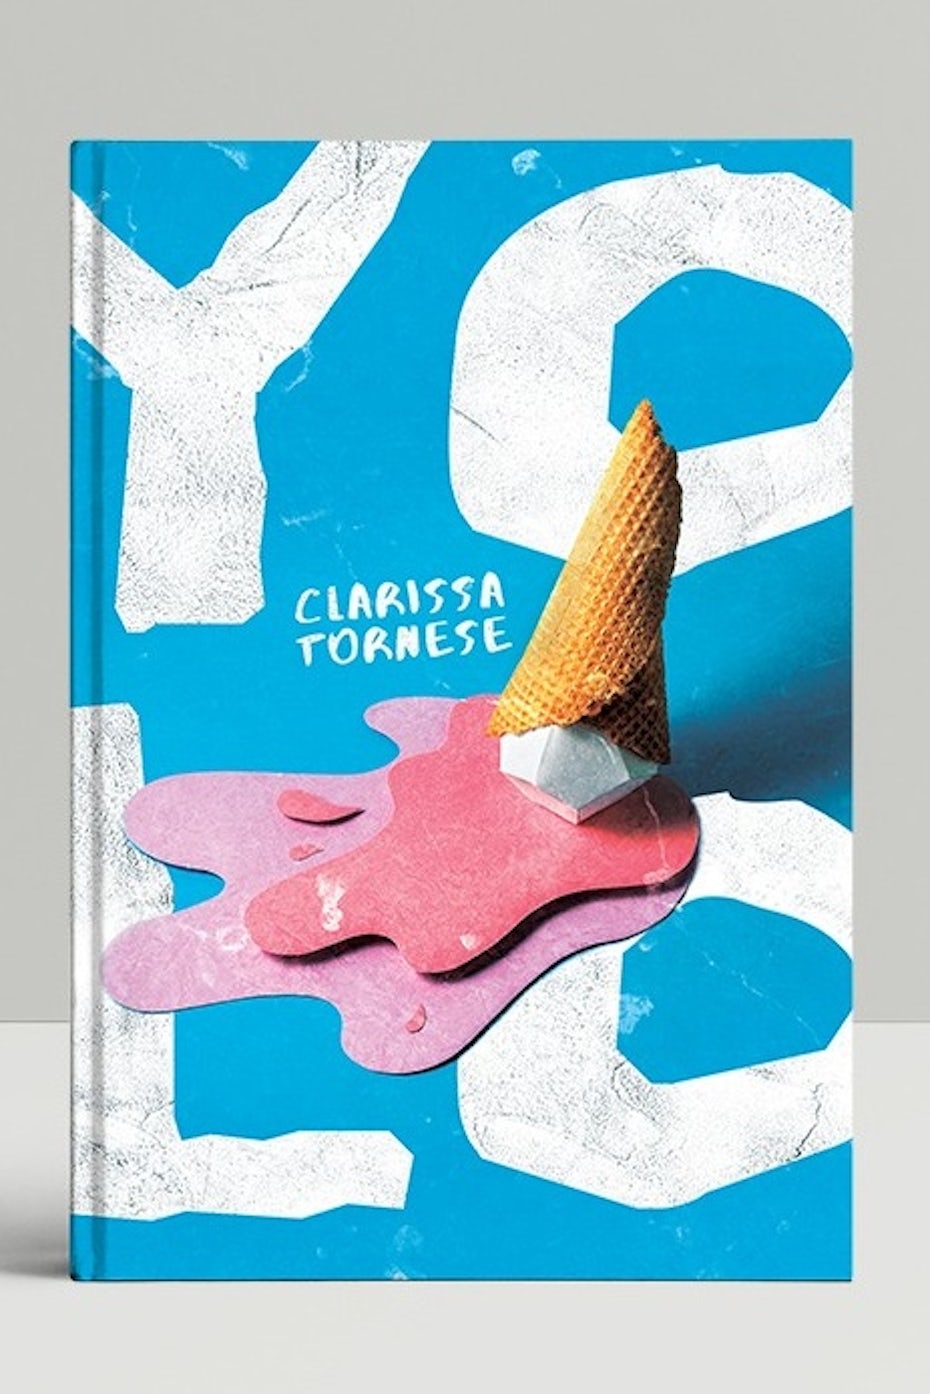 Graphic design trends 2020 example: Paper cut-out style for a book cover design